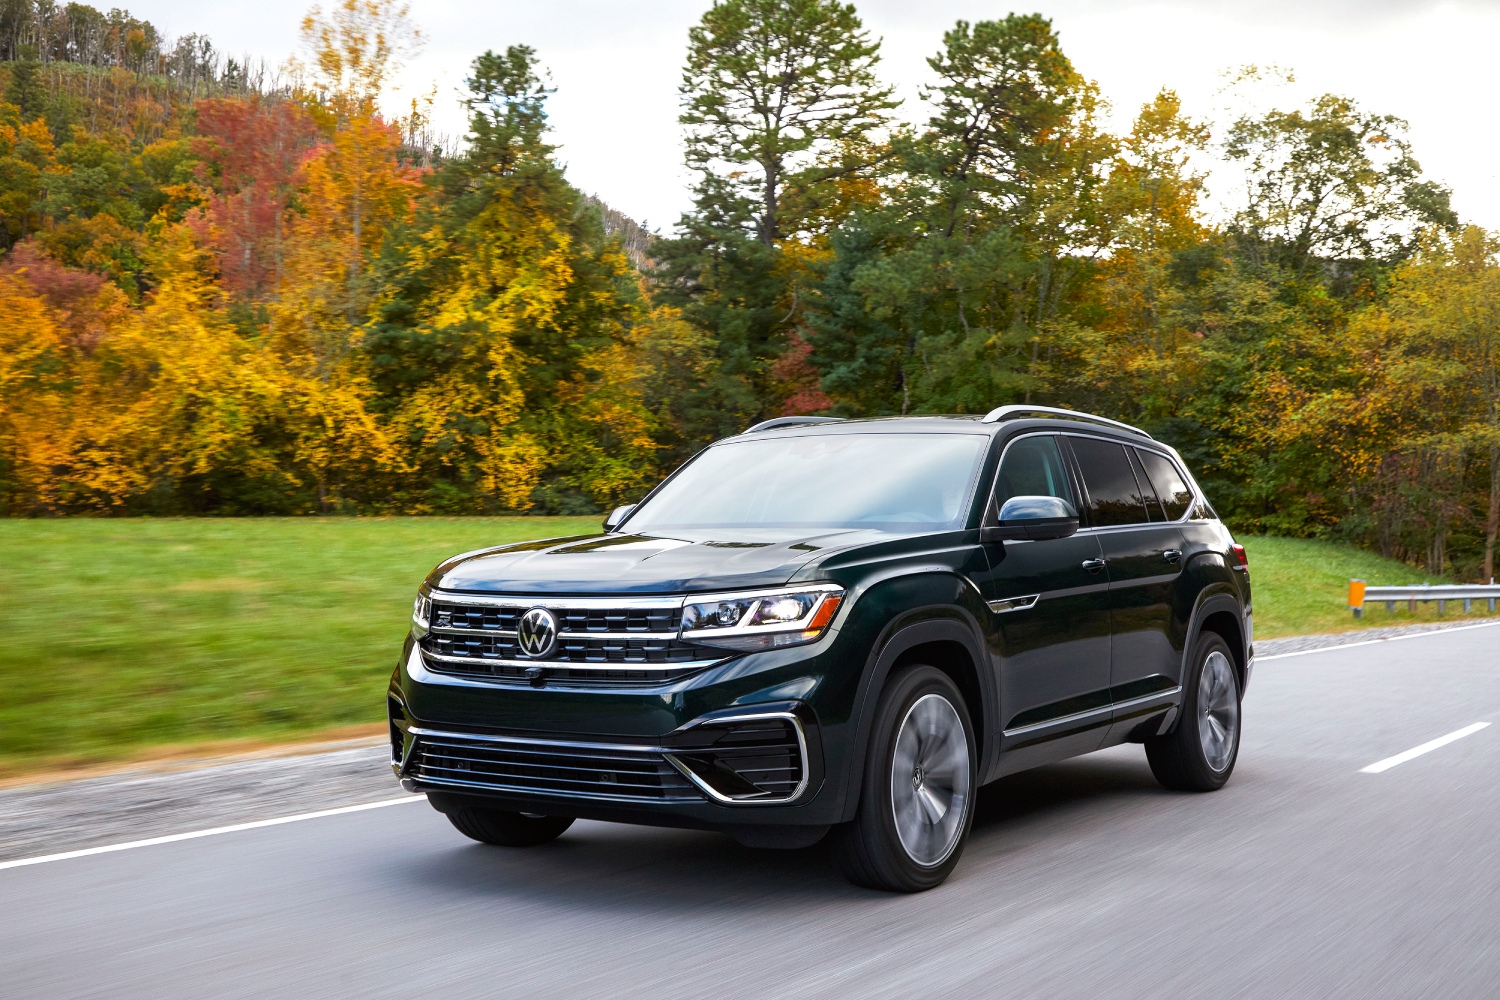 SUVs with easy-to-use infotainment systems like this Volkswagen Atlas